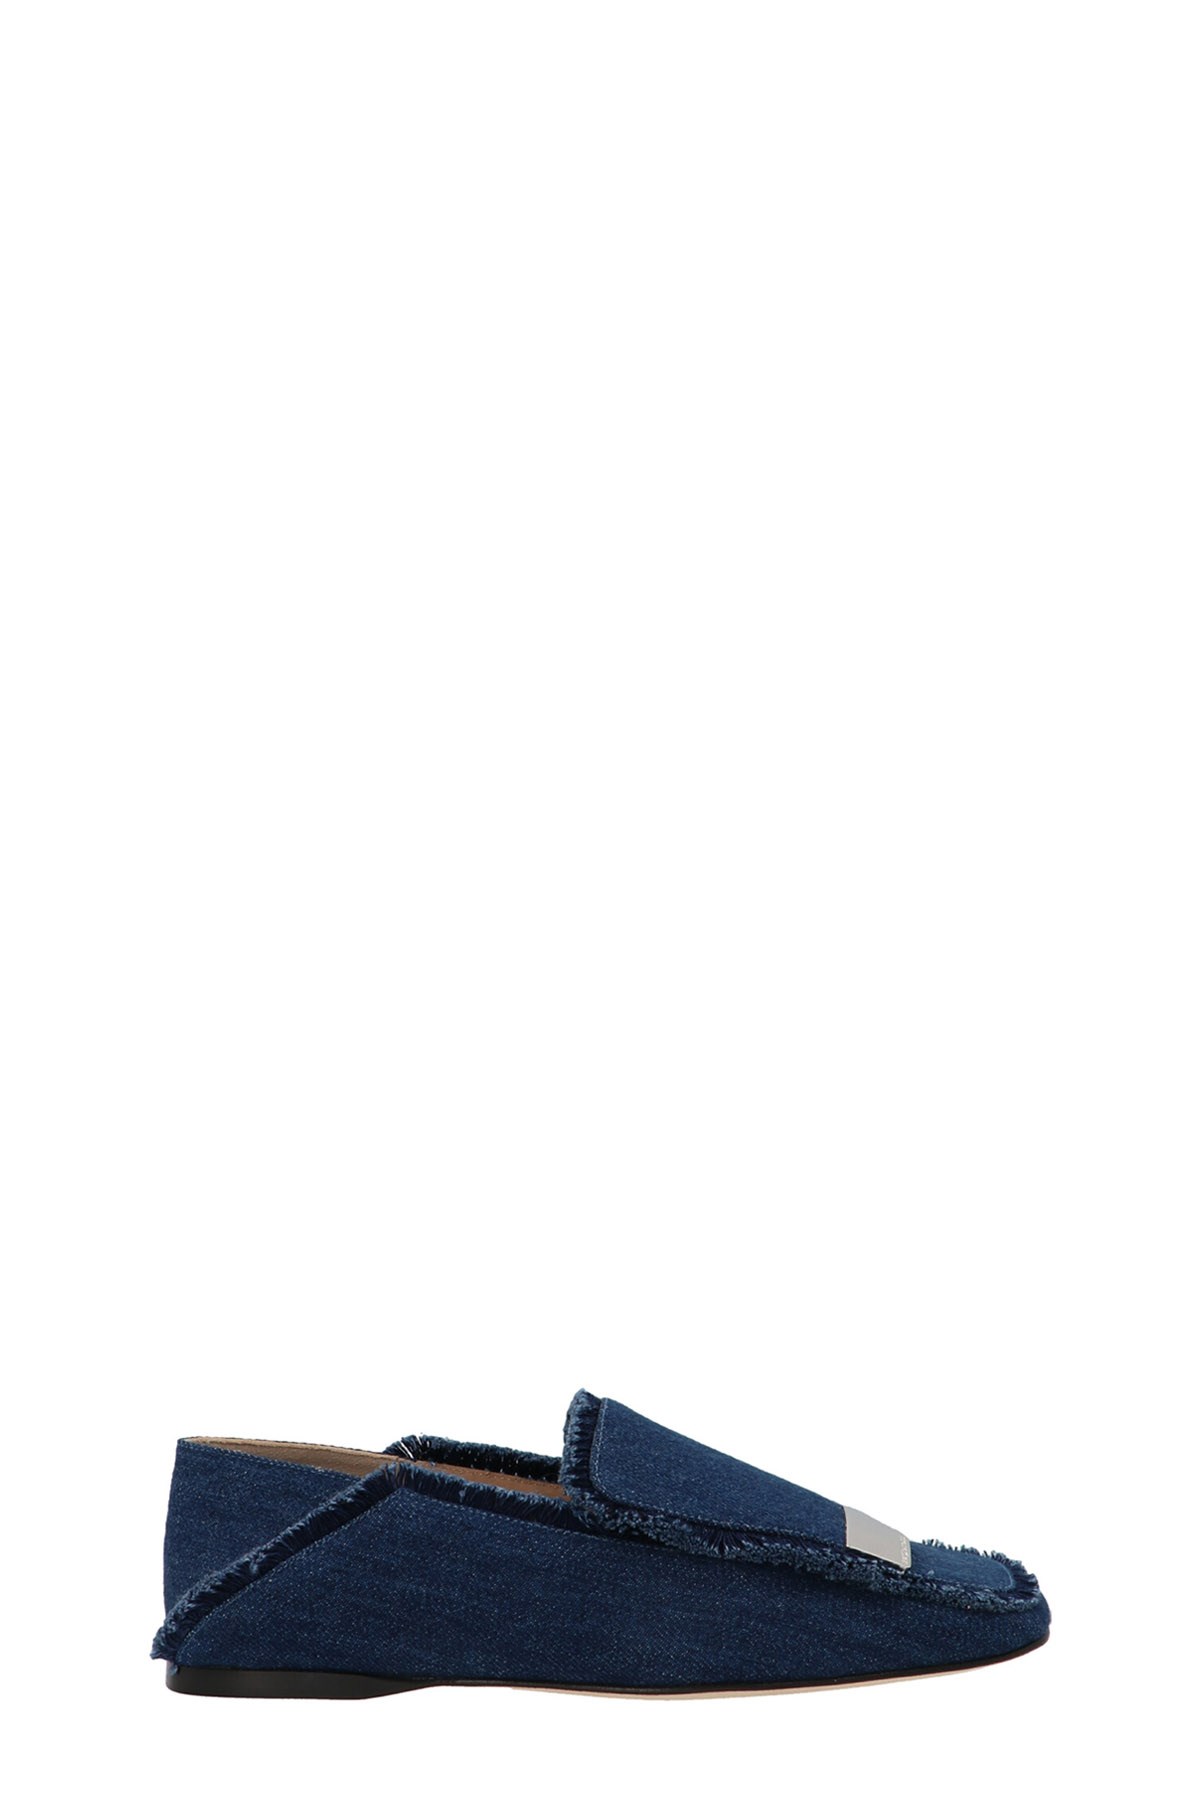 SERGIO ROSSI Loafers 'Jeans Fringed'